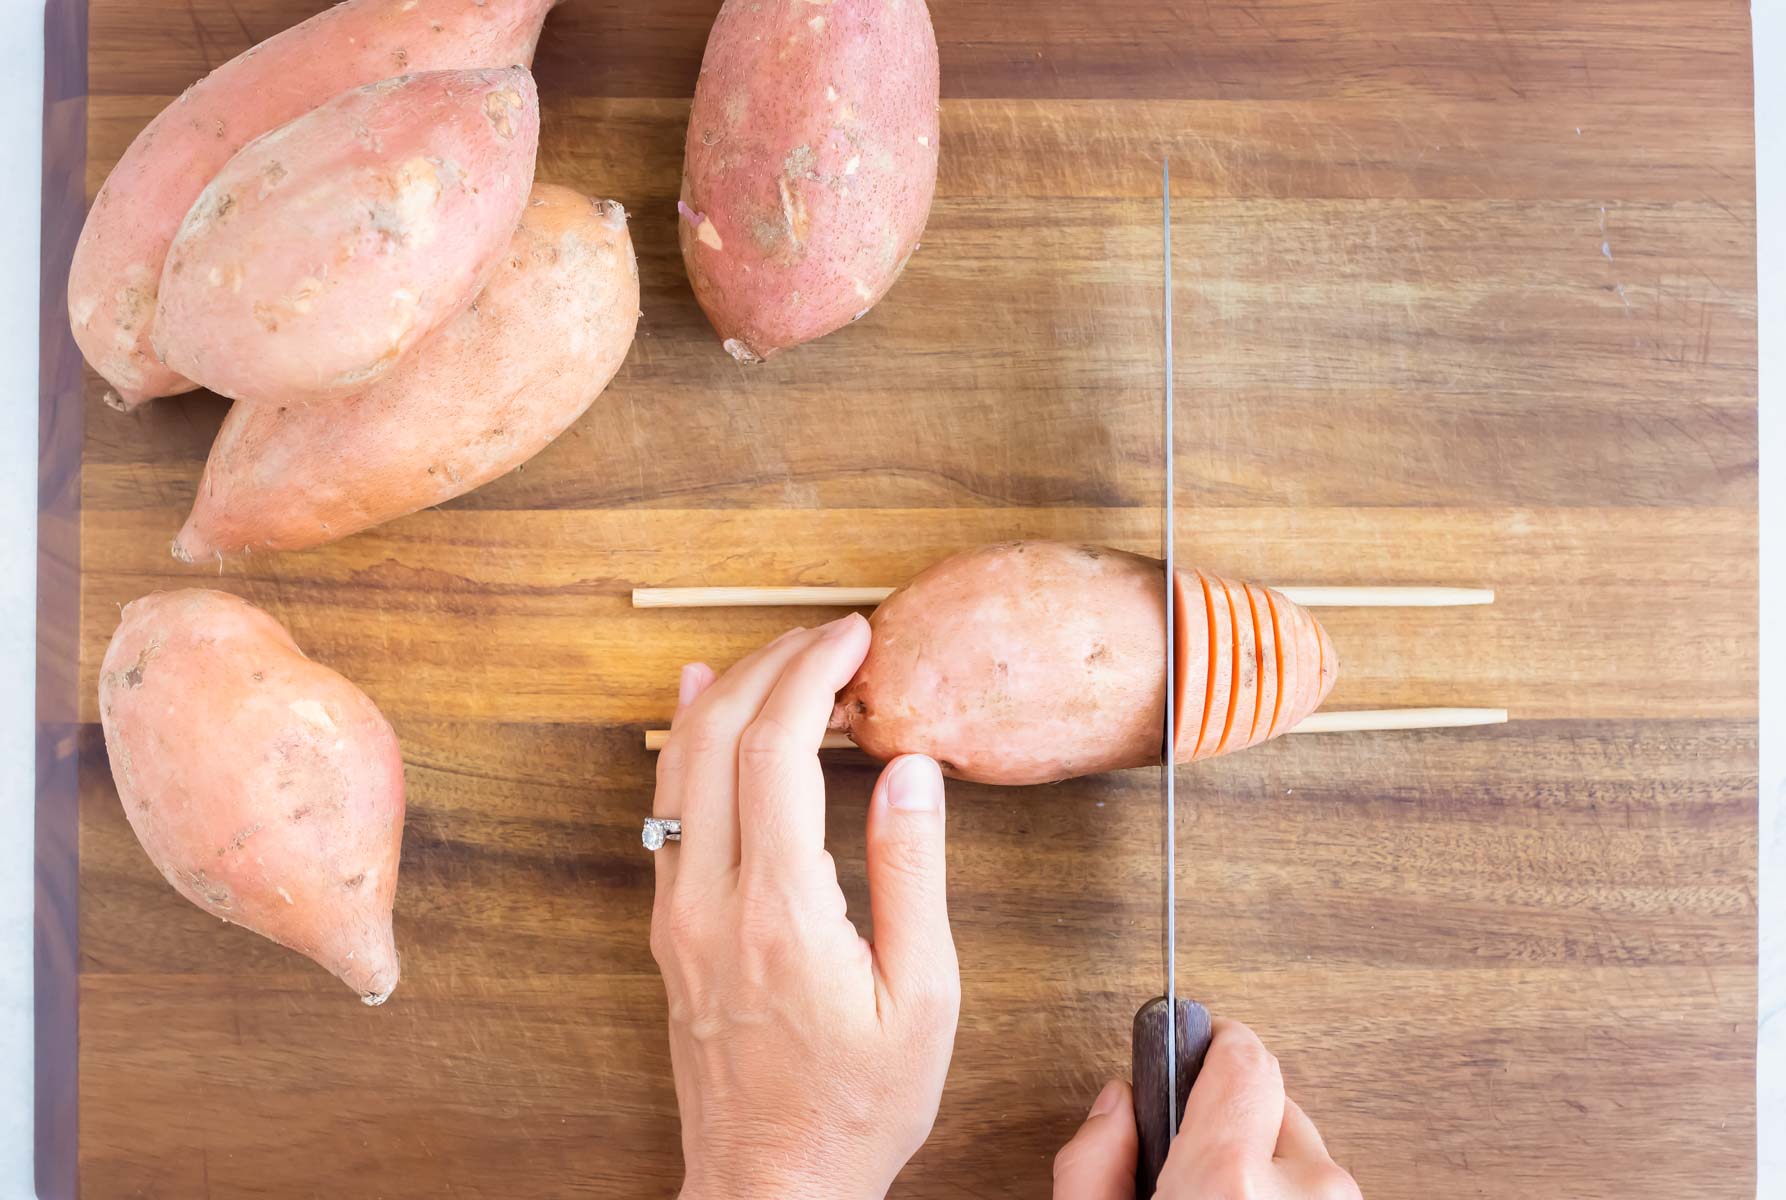 How to Cut Sweet Potatoes - It's a Veg World After All®